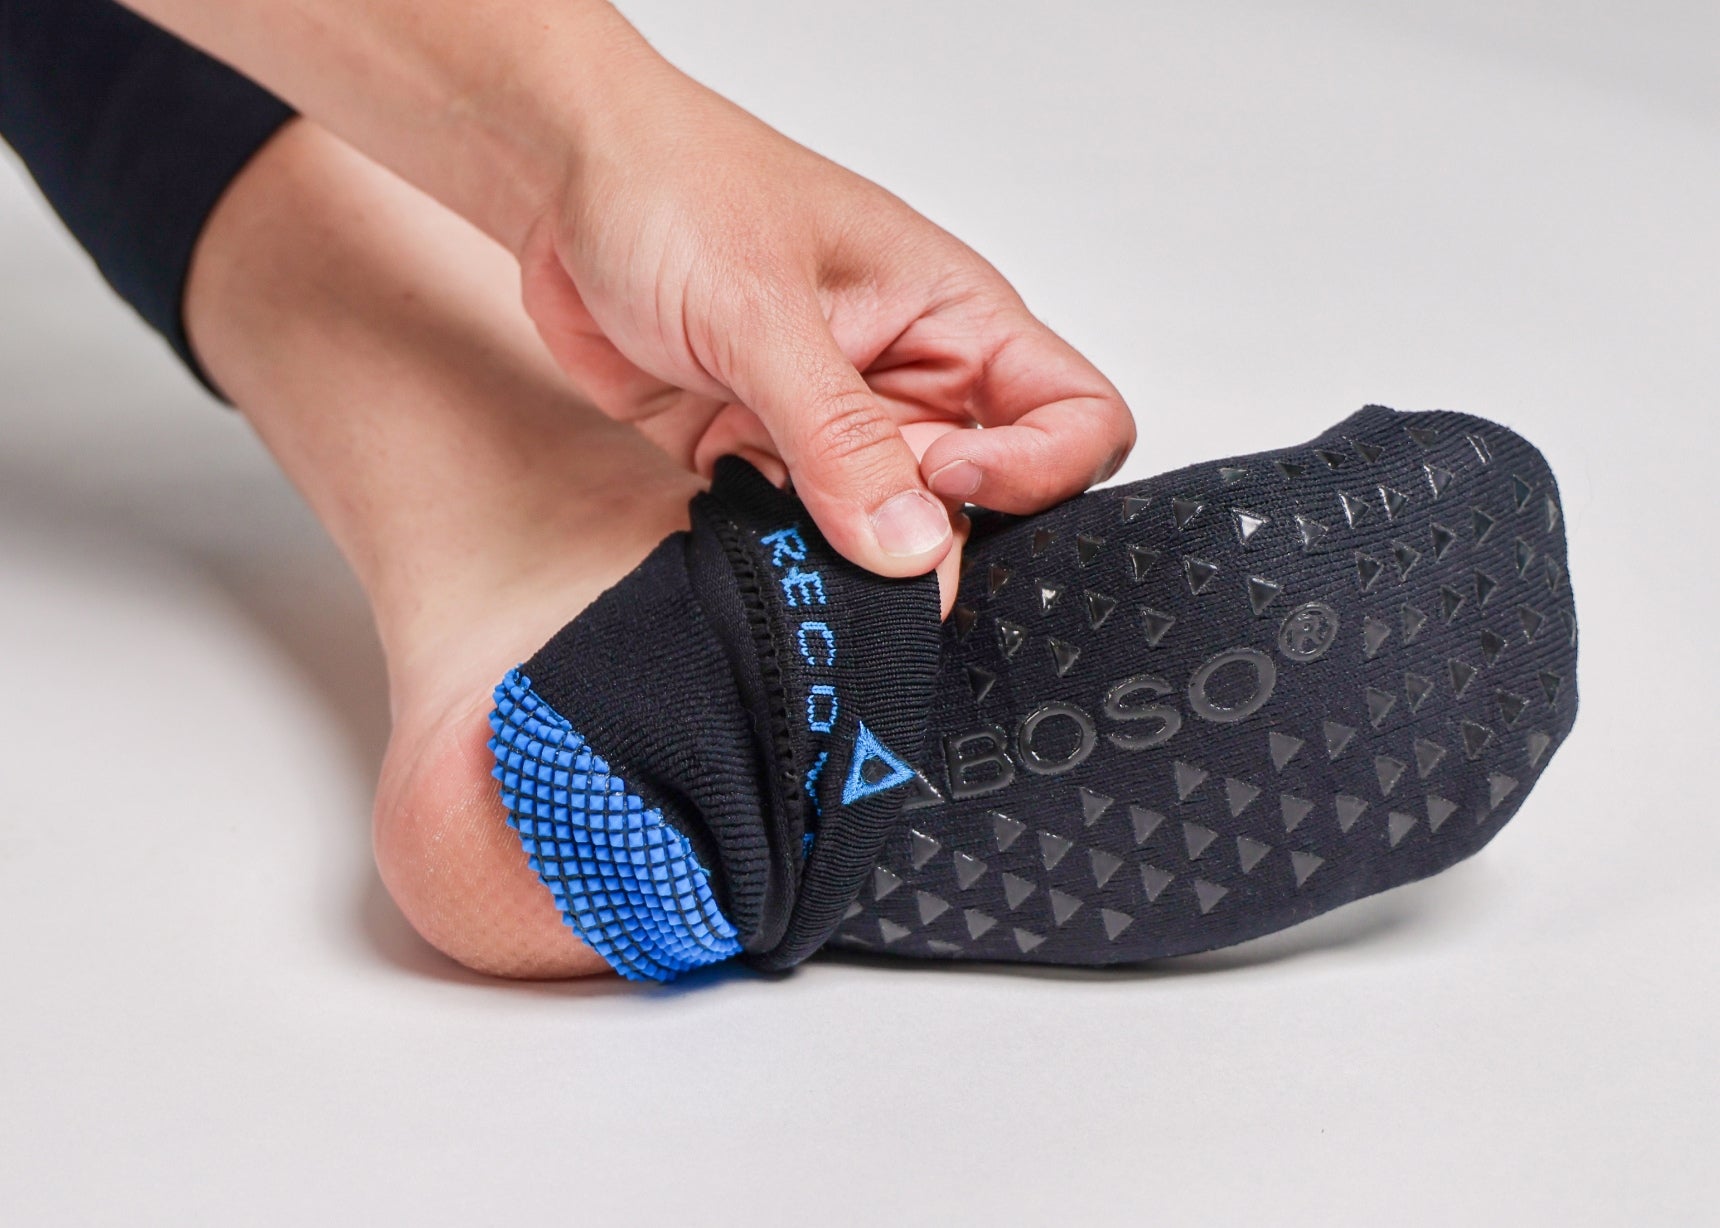 The Naboso neuro-stimulating texture inside the sock with grip texture outside it